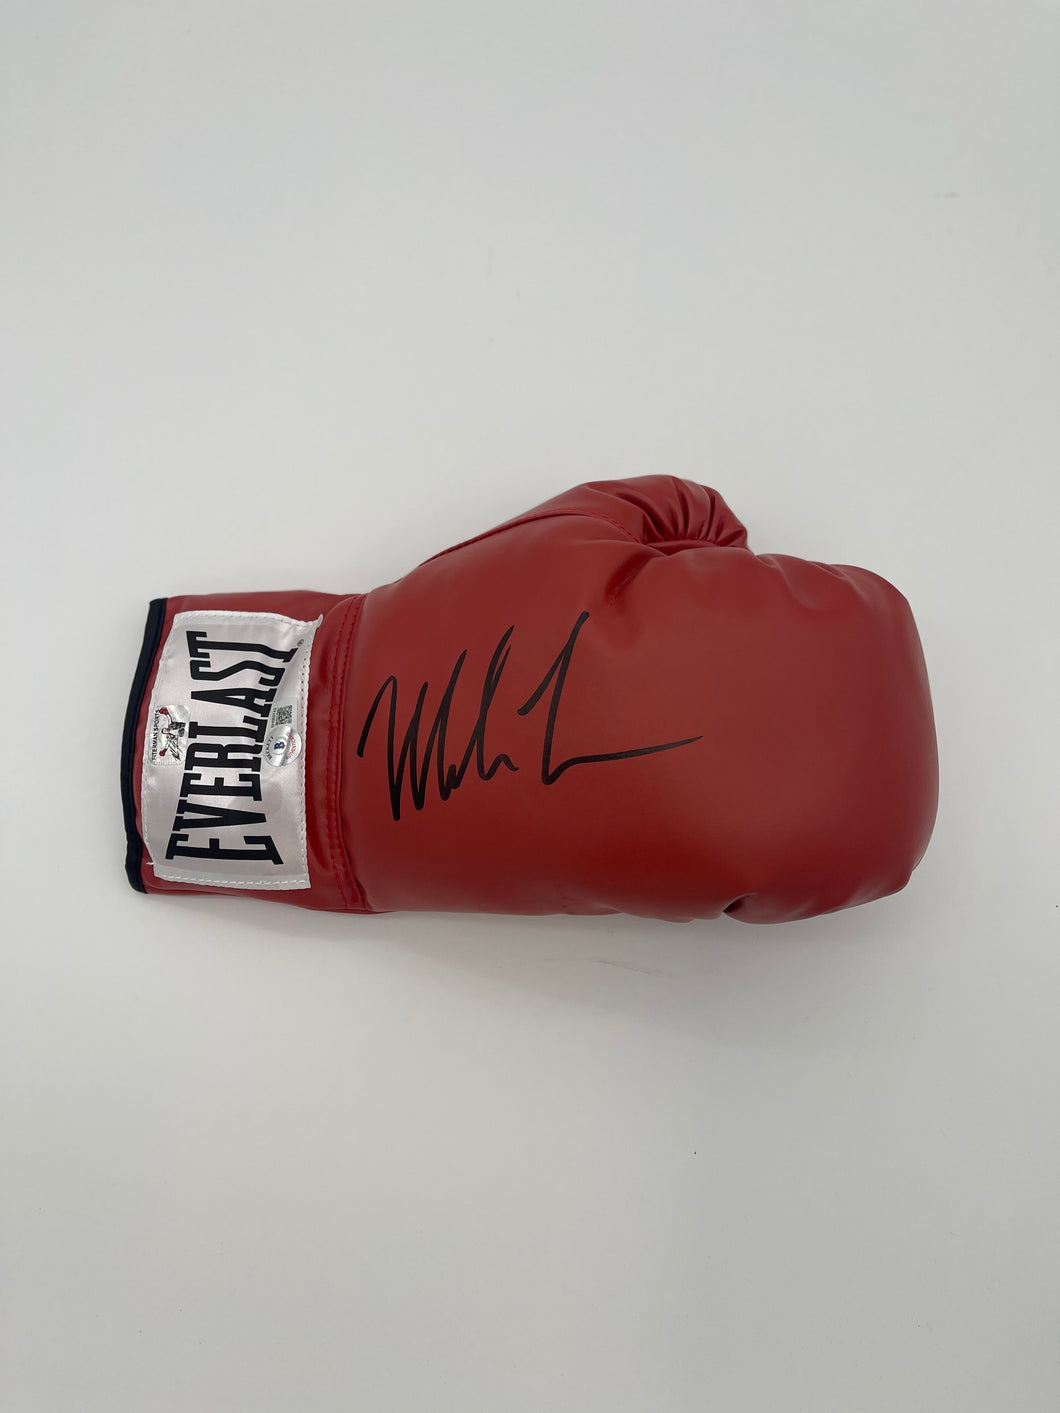 Mike Tyson signed boxing glove